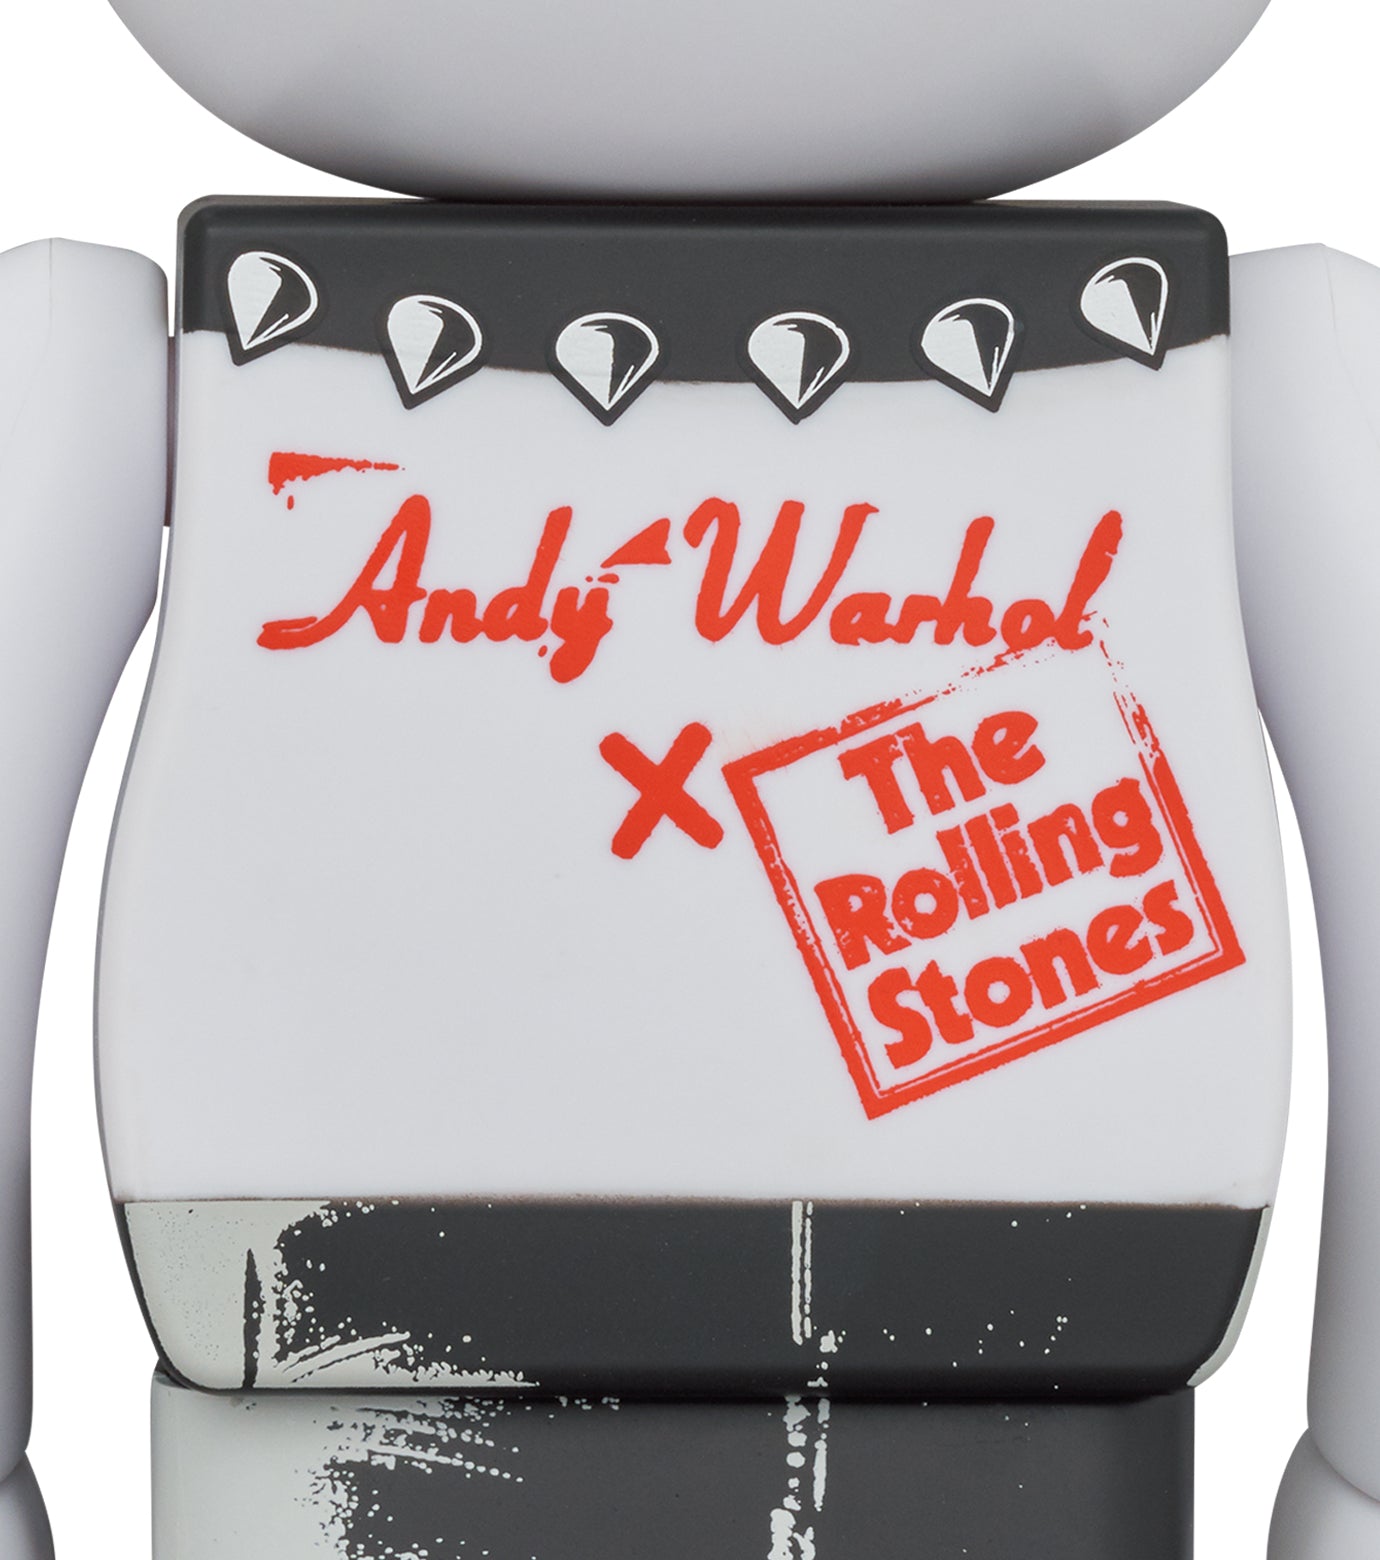 BE＠RBRICK The Rolling Stones "Sticky Fingers" Design Ver. 100％ & 400％